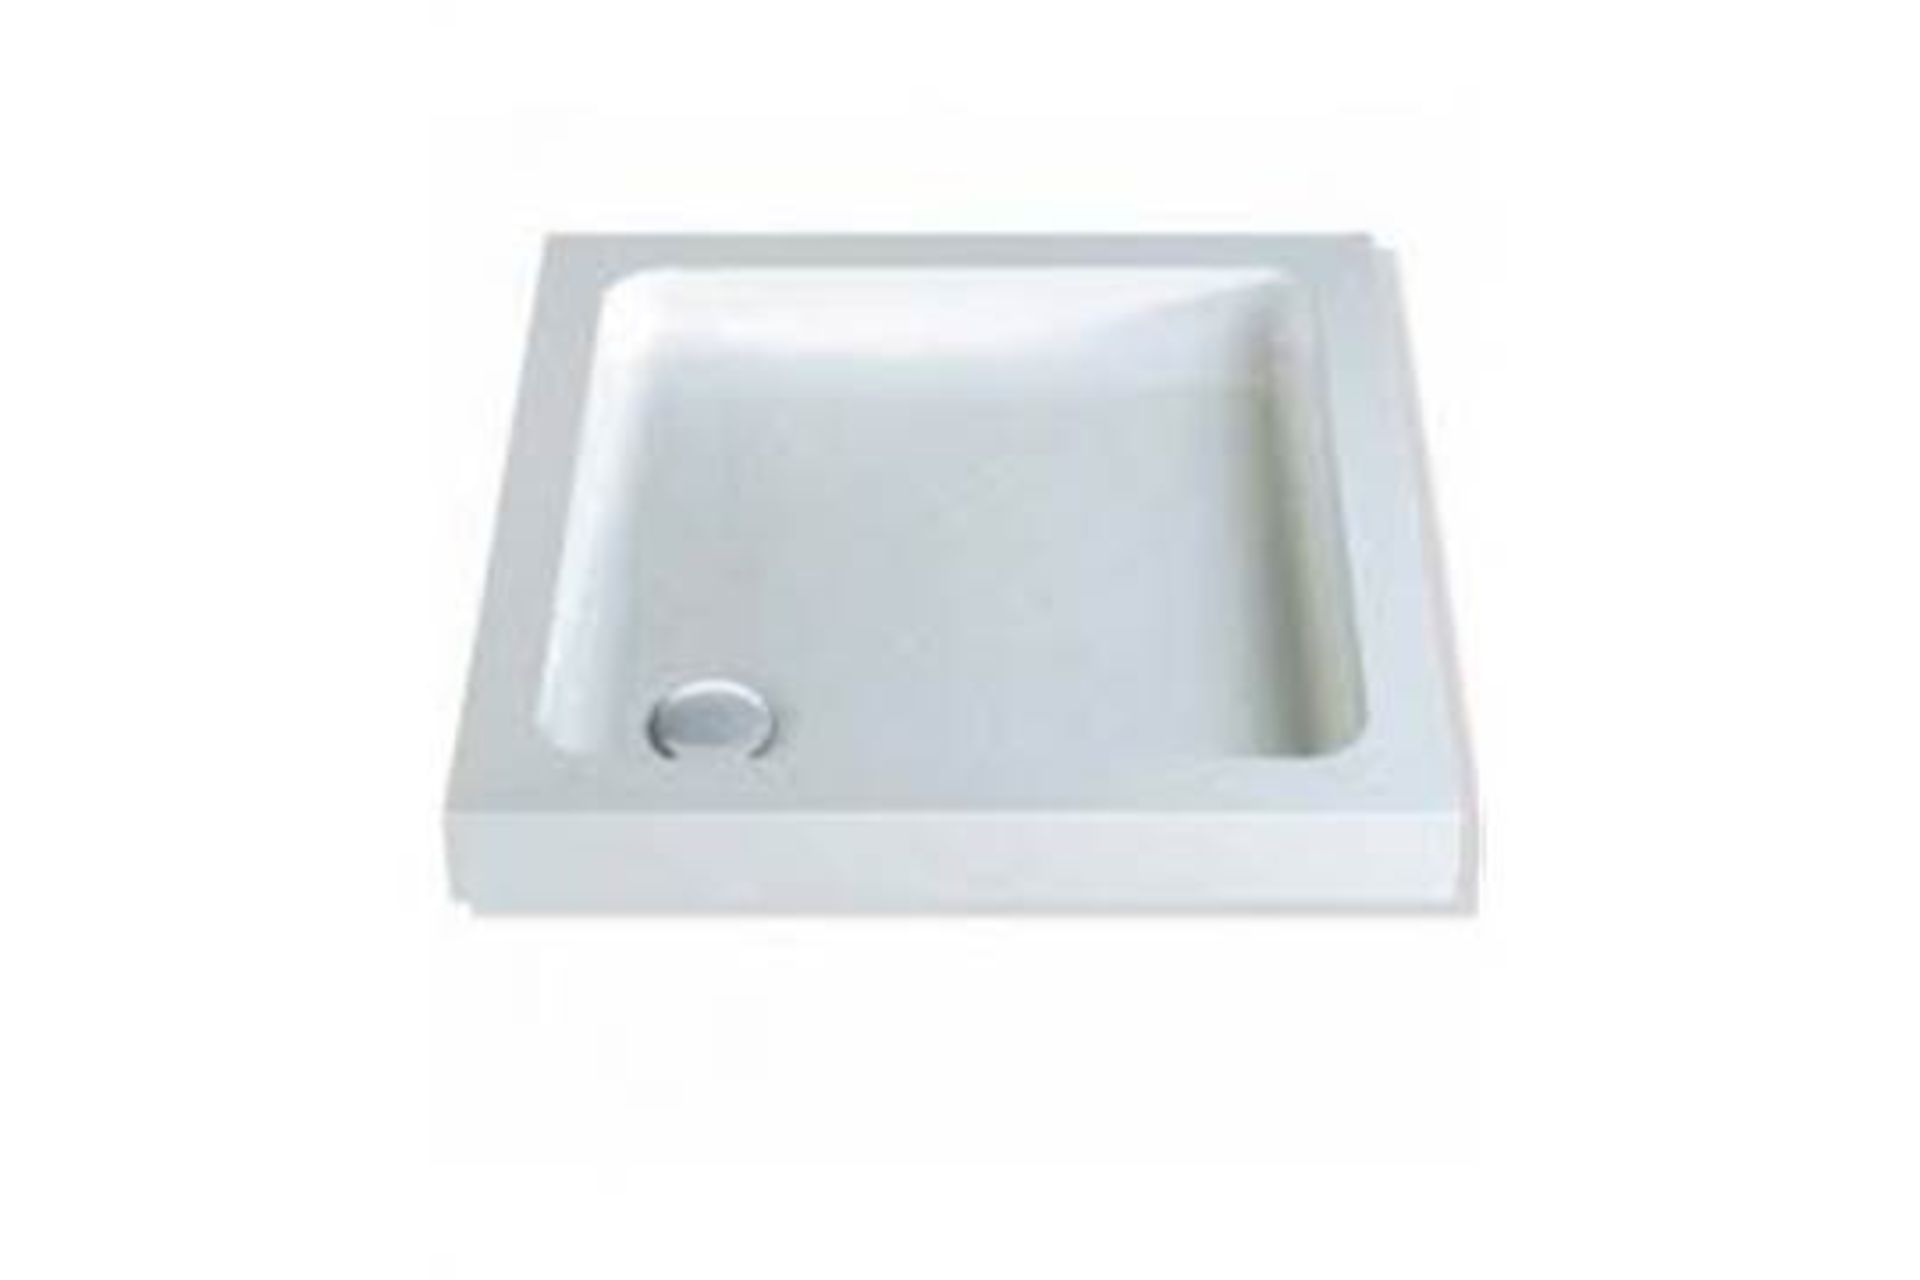 1 BAGGED RECTANGLE STONE RESIN SHOWER TRAY 120CM BY 80CM (45MM HIGH) RRP £199 - Image 2 of 2